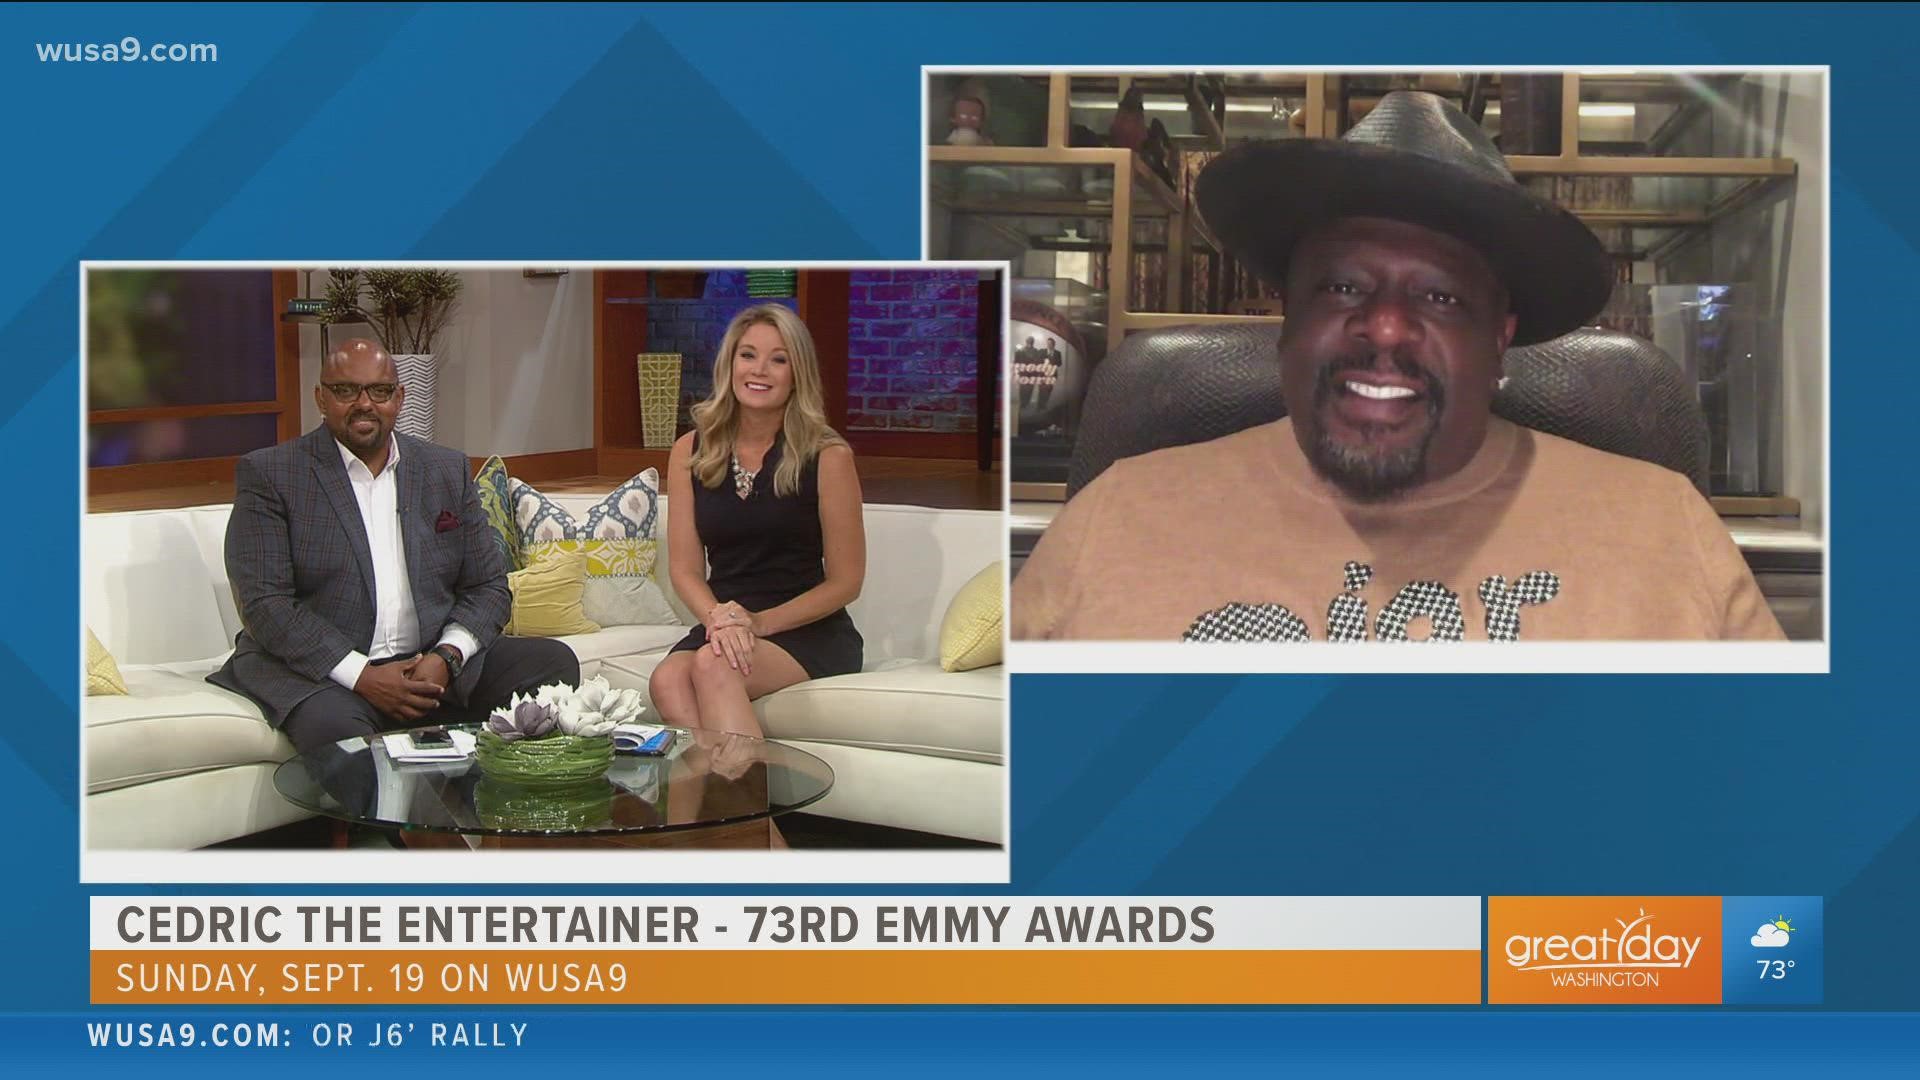 Kristen & Marc catch up with Cedric the Entertainer ahead of the 73rd Emmy Awards. Cedric is hosting the awards & he talks about how he's preparing for the role.